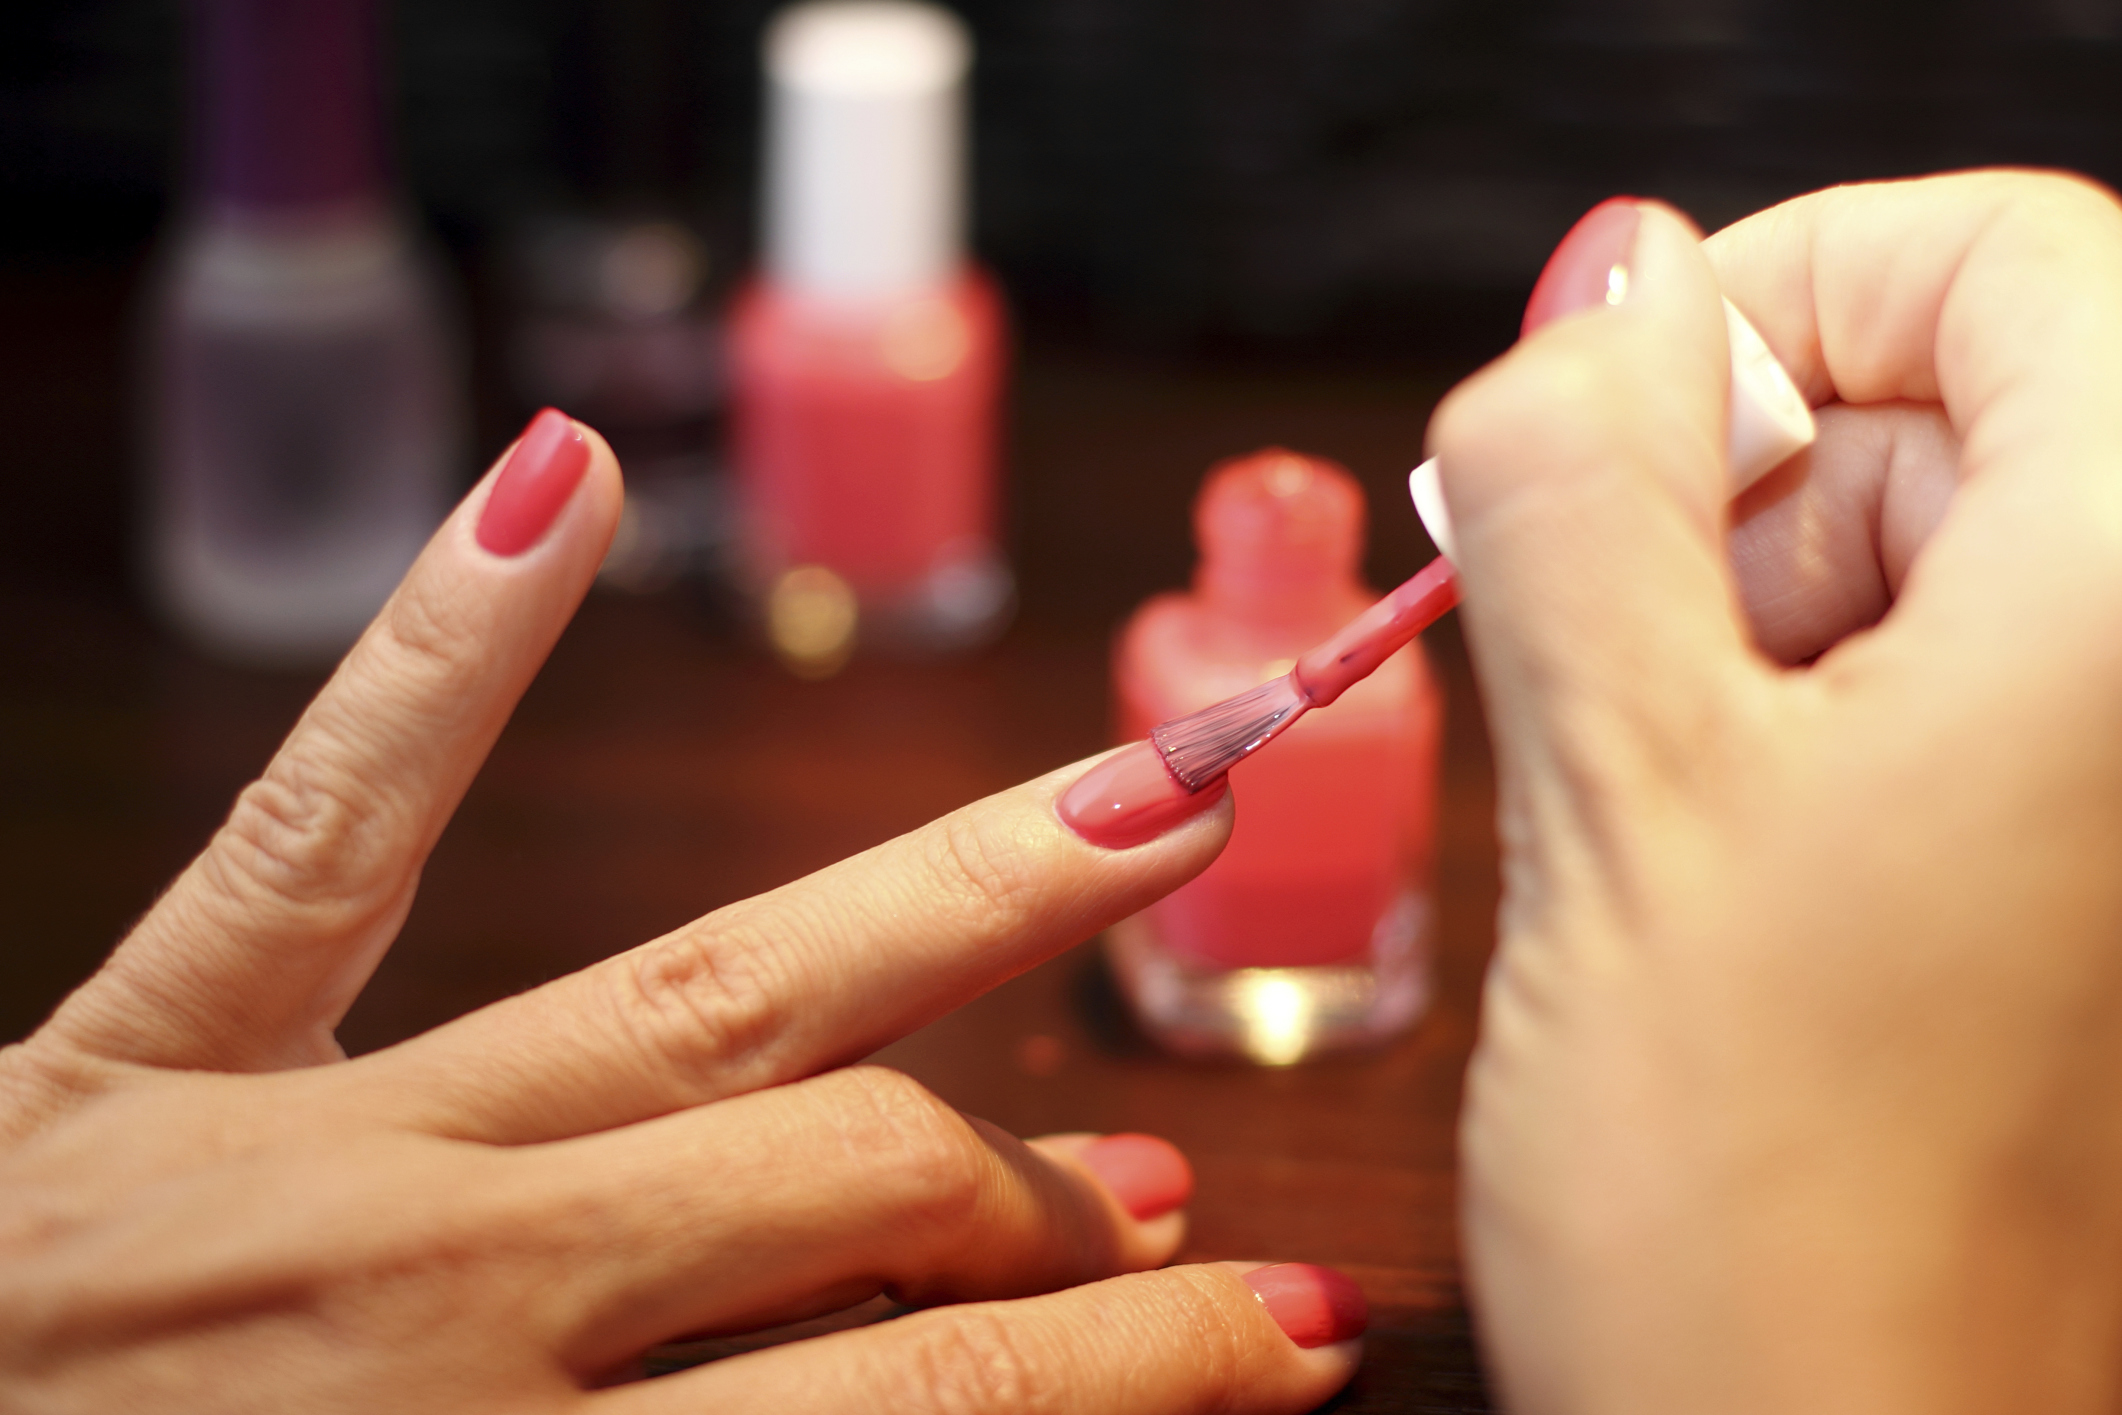 Nail polish detects roofies in drinks